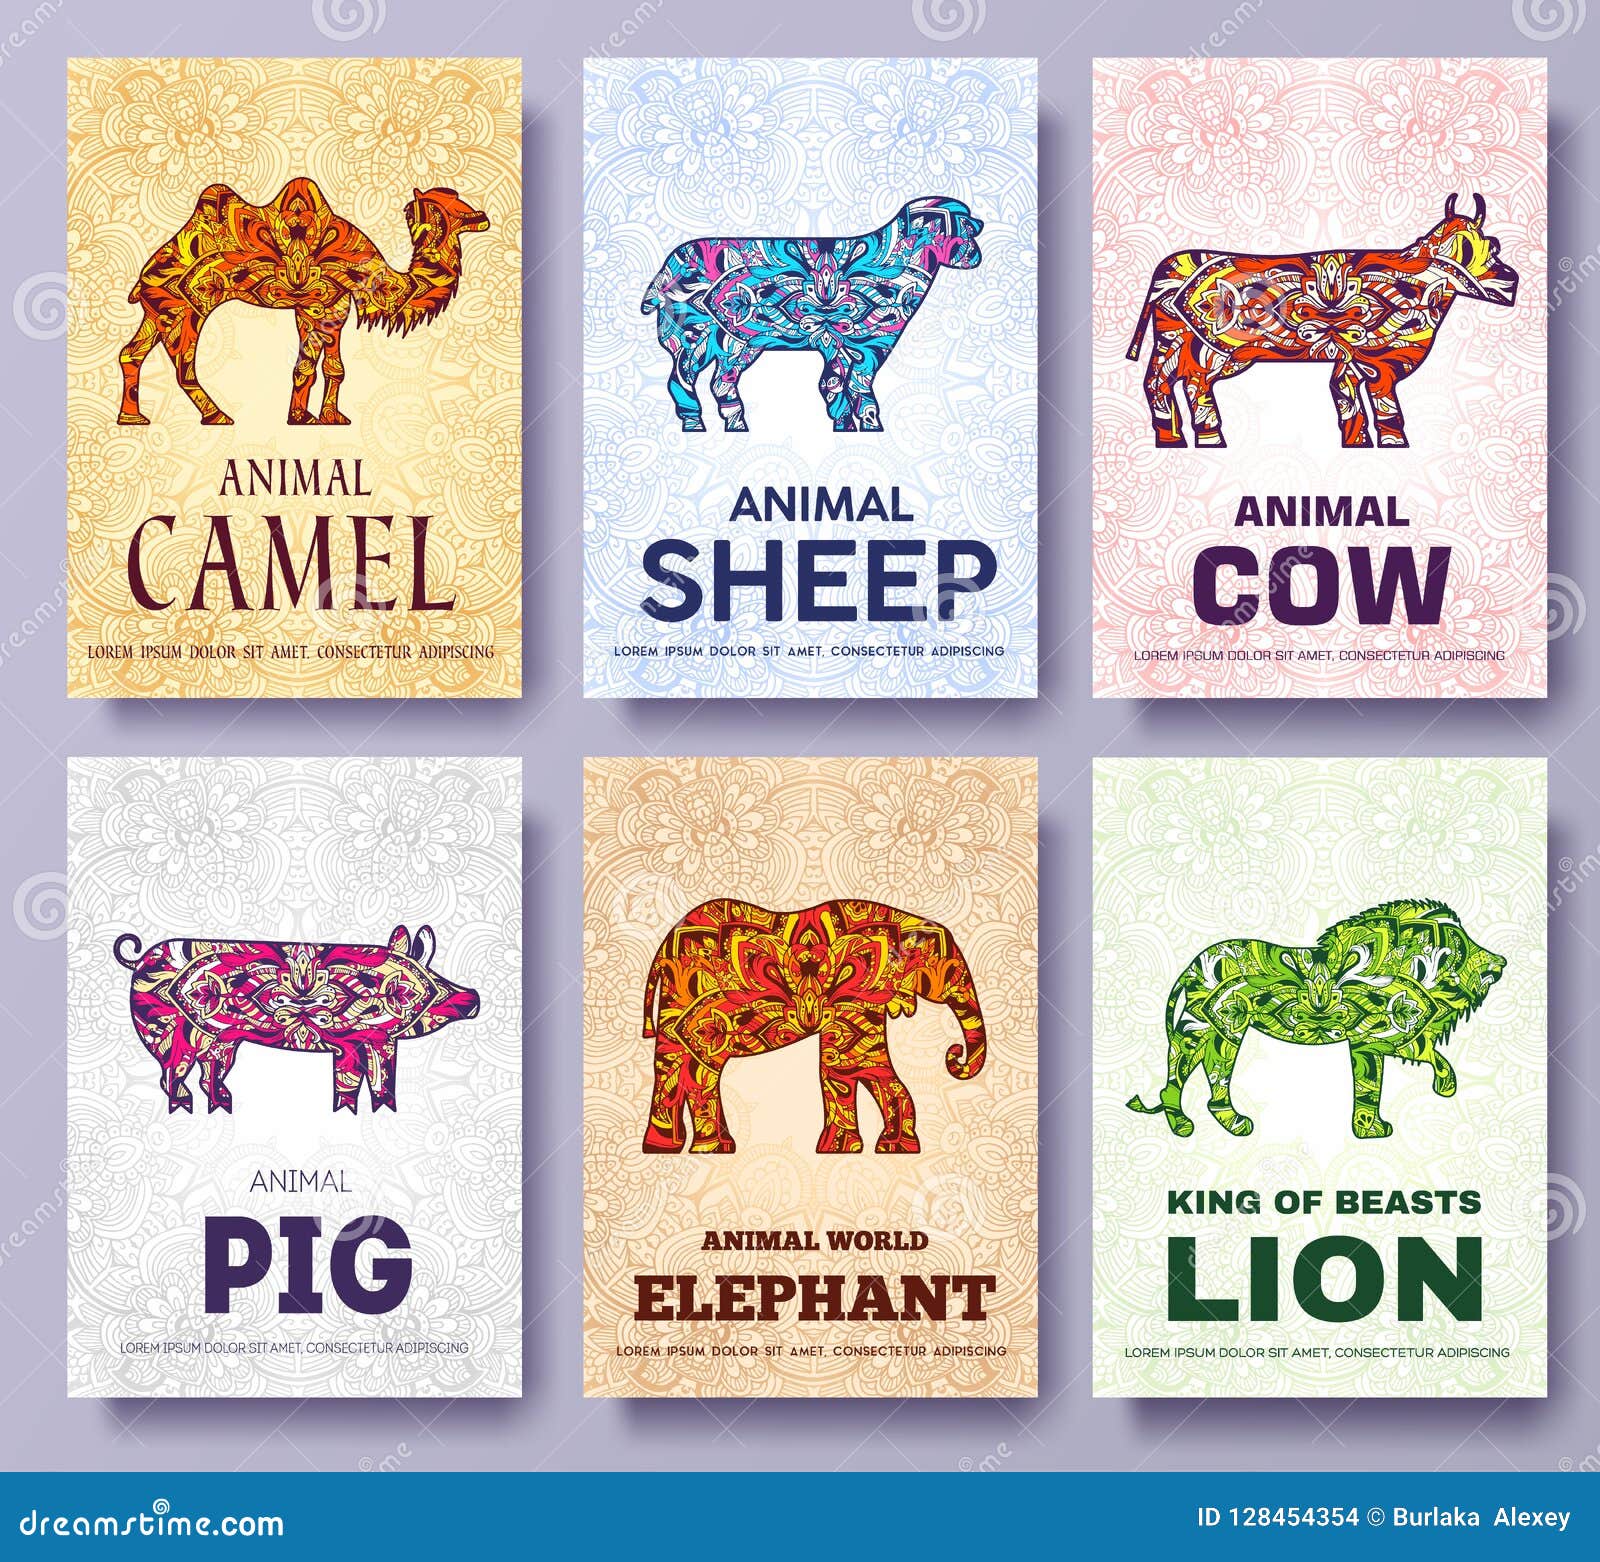 Art Wild Animals Brochure Cards. Jungle Template of Flyear, Magazines,  Posters, Book Cover, Banners, Booklet Stock Illustration - Illustration of  abstract, decorate: 128454354